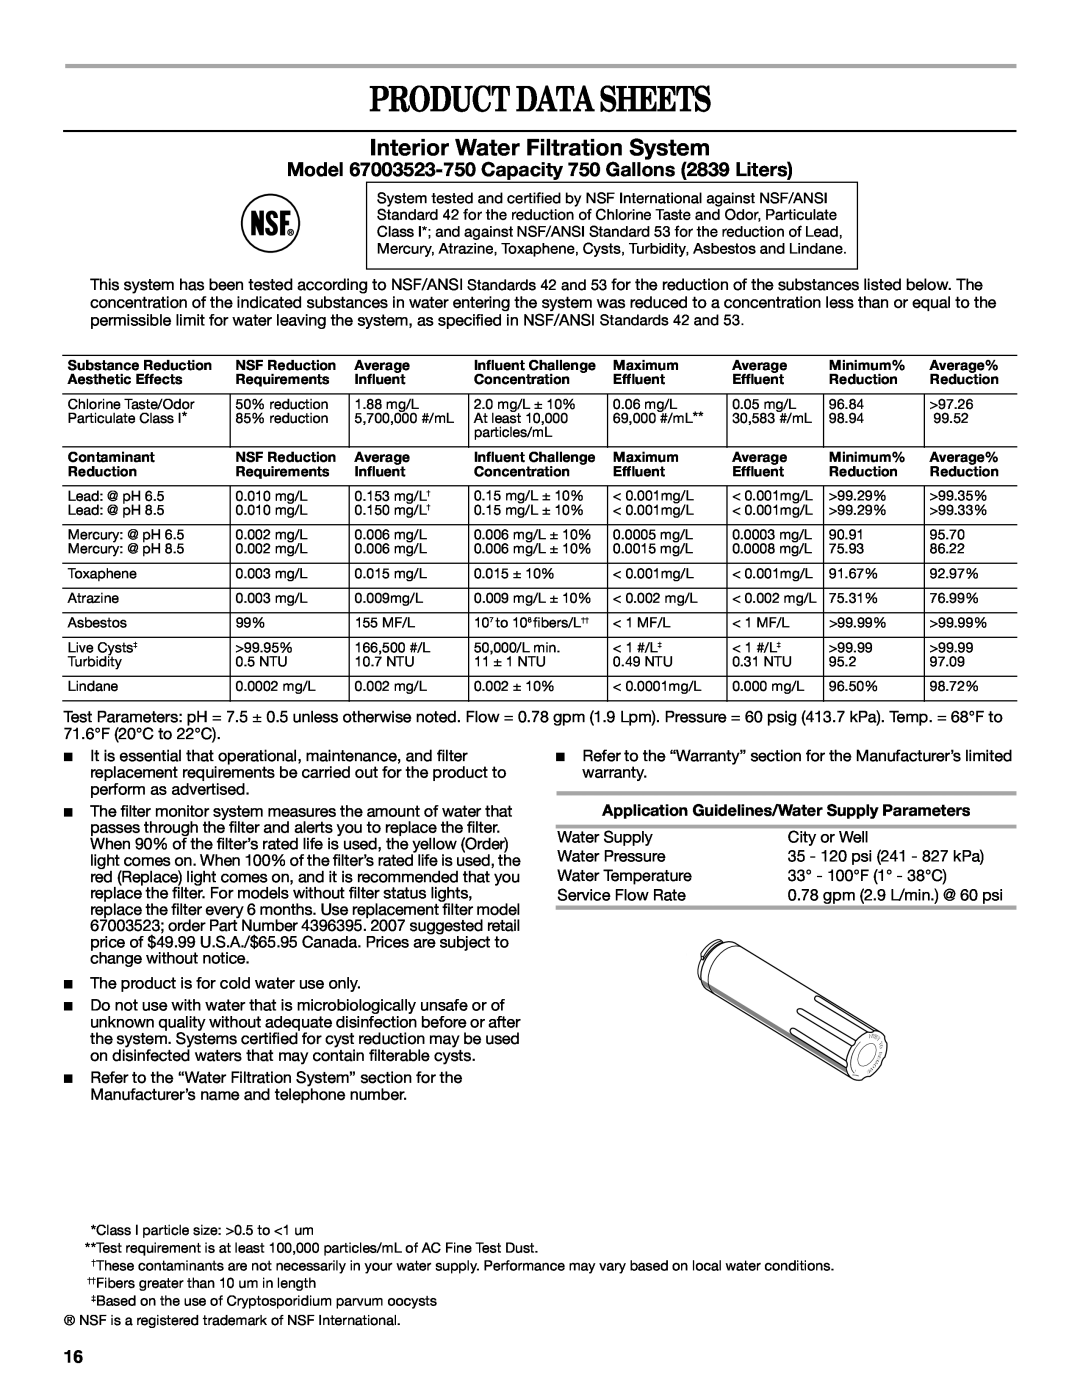 Whirlpool 12828188A Product Data Sheets, Interior Water Filtration System, Application Guidelines/Water Supply Parameters 